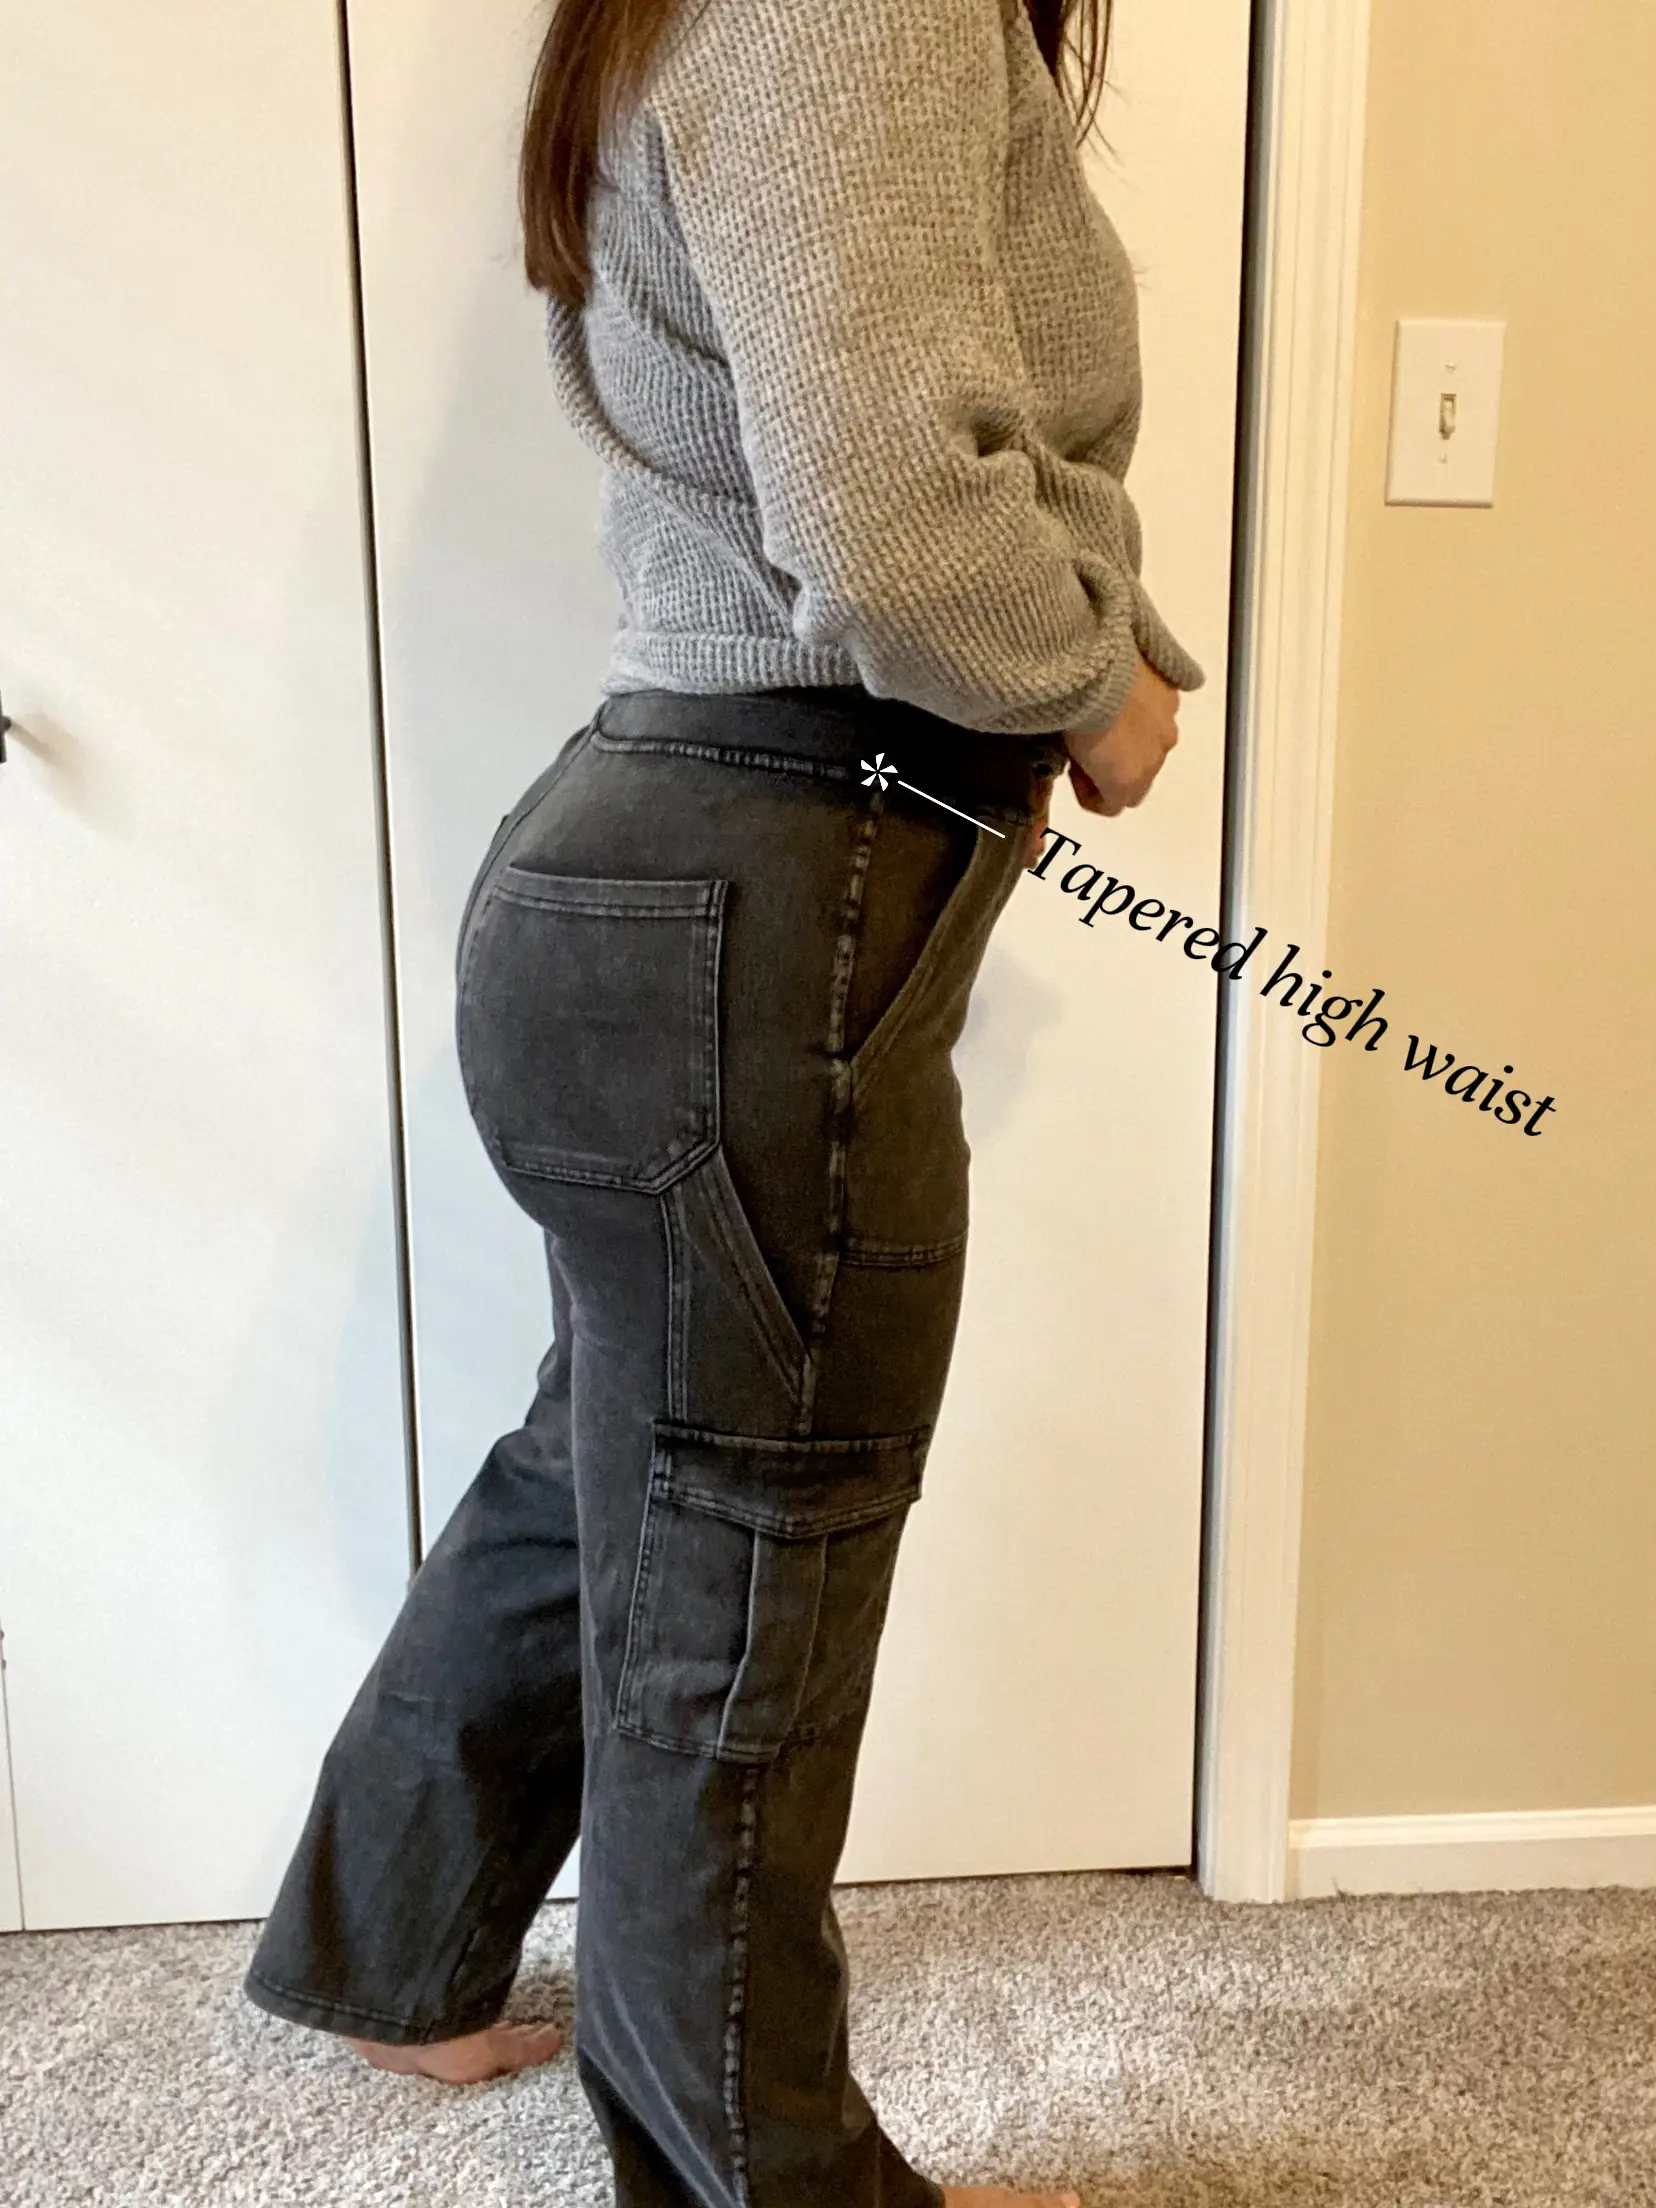 Halara Magic Jeans  Affordable Stretchy Jeans for Curvy Women